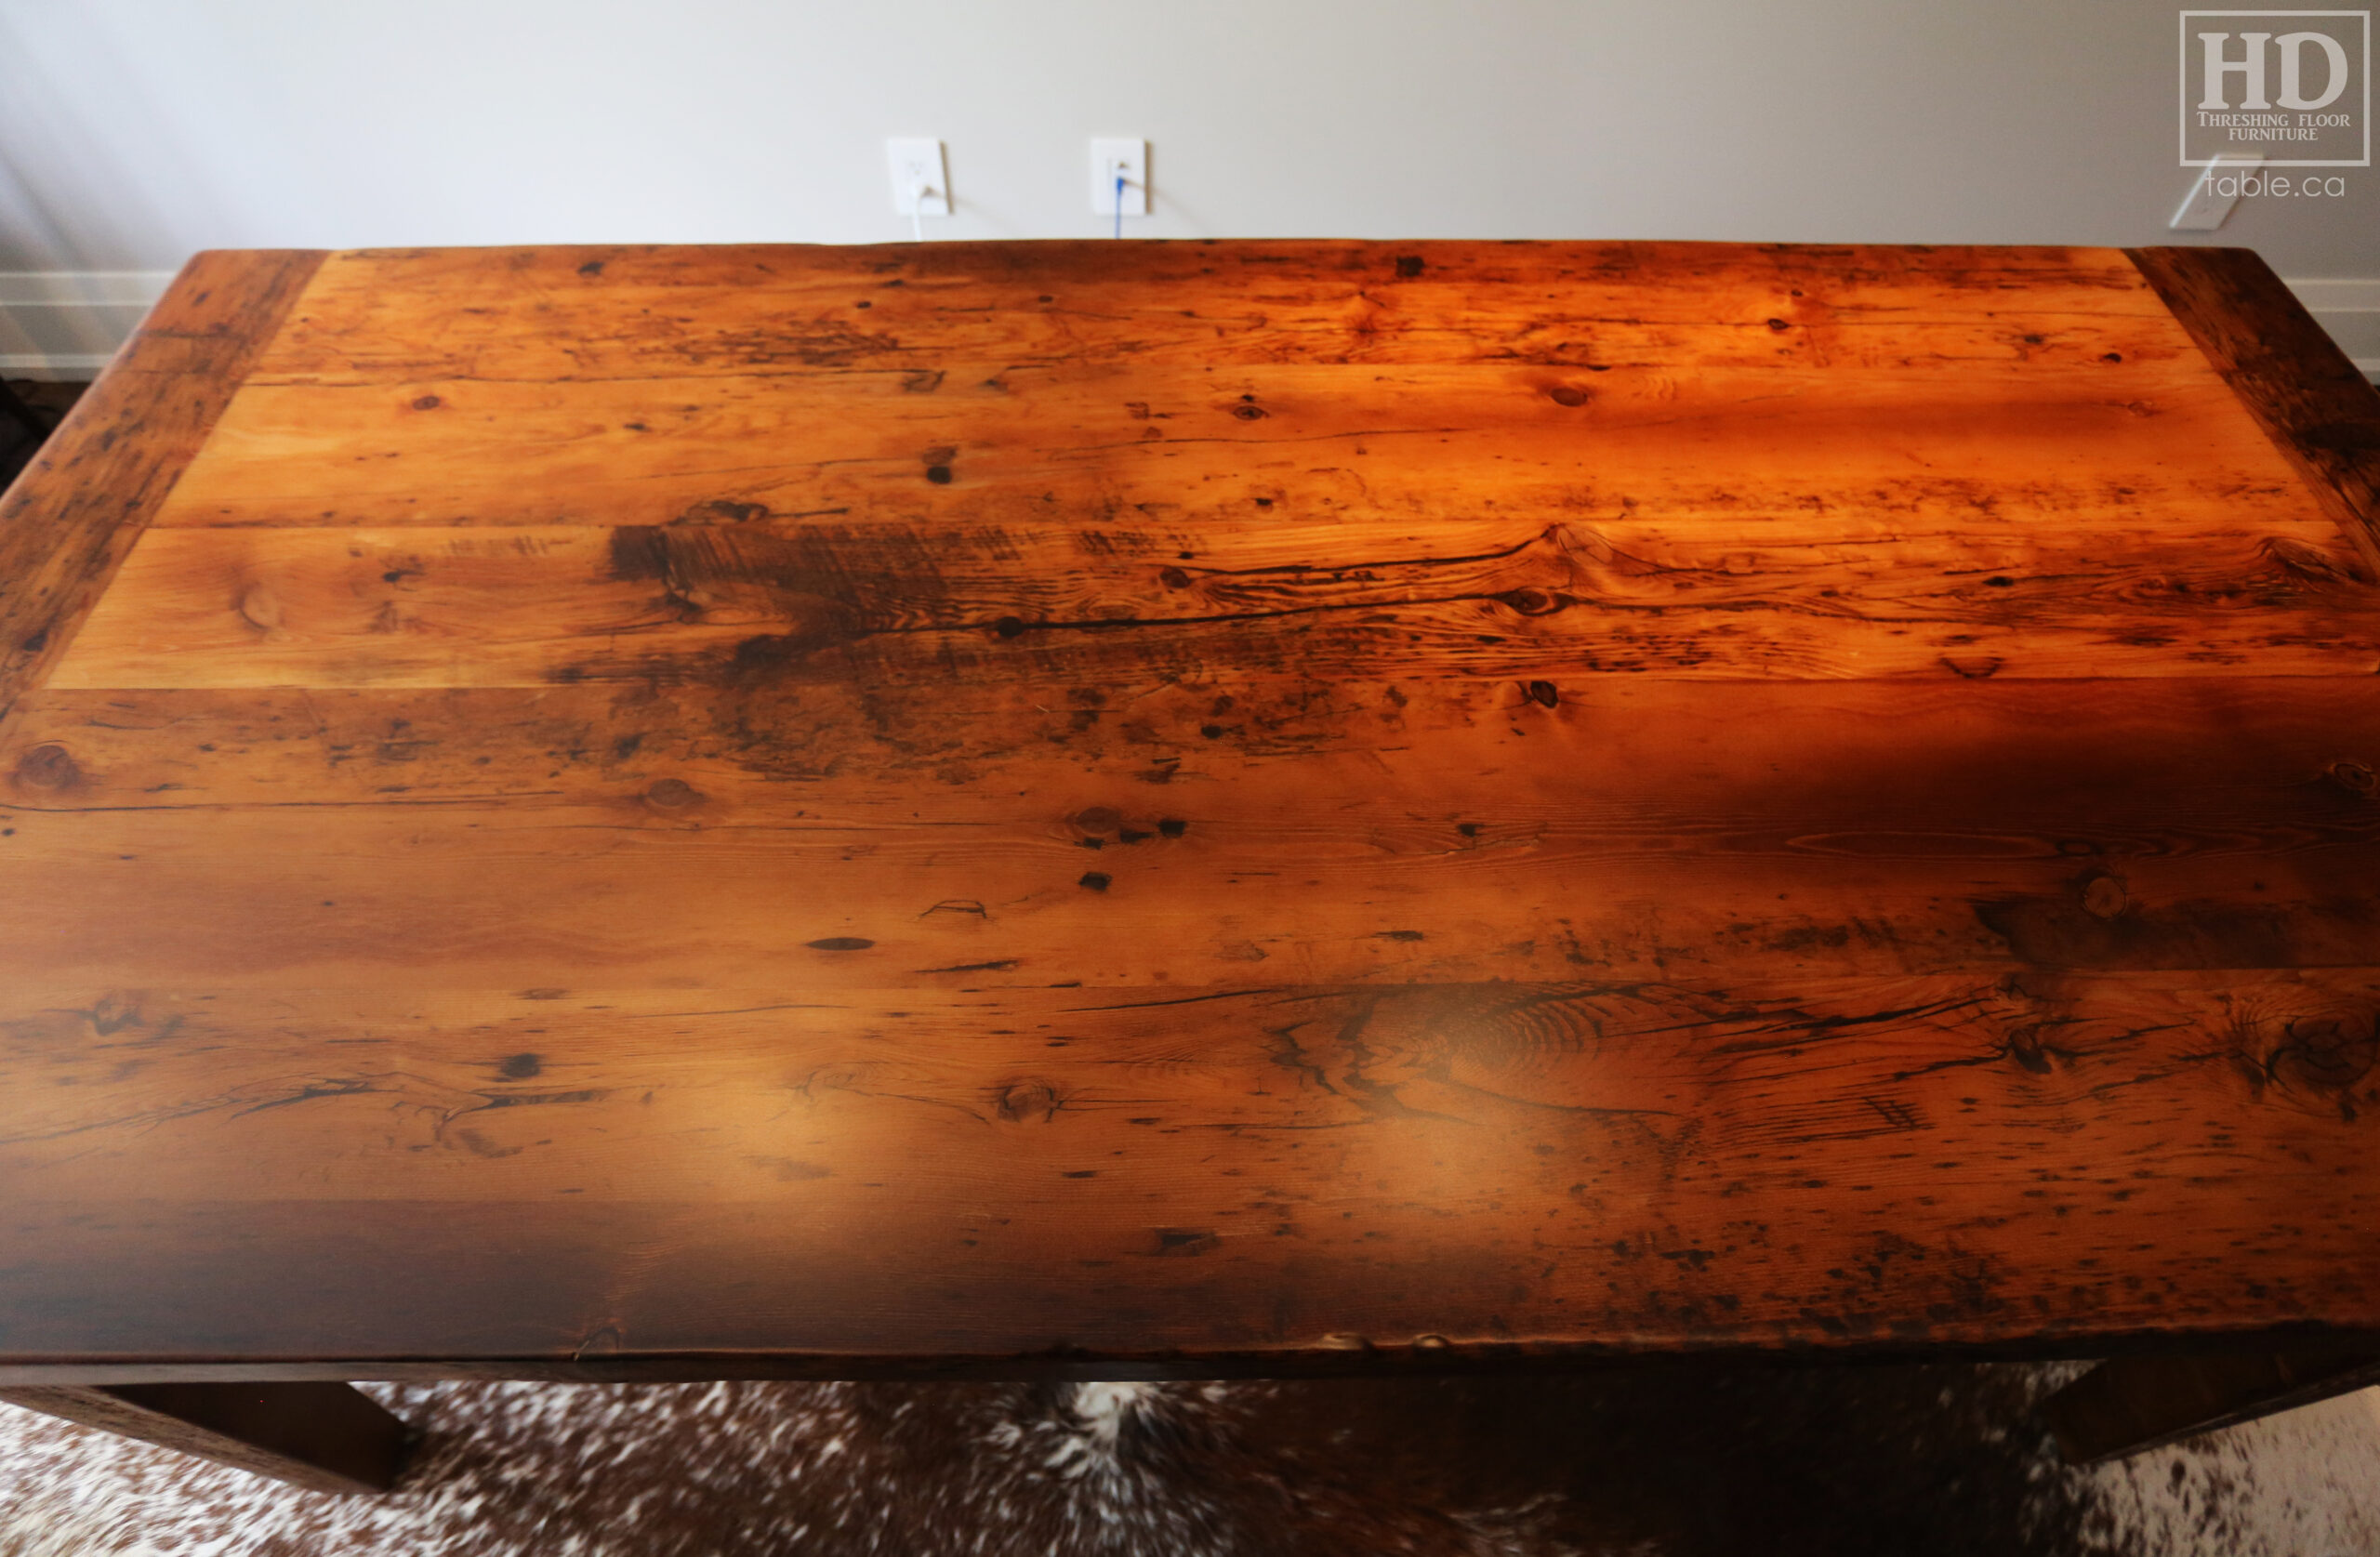 Reclaimed Wood Harvest Table made from Ontario Barnwood by HD Threshing Floor Furniture / www.table.ca 